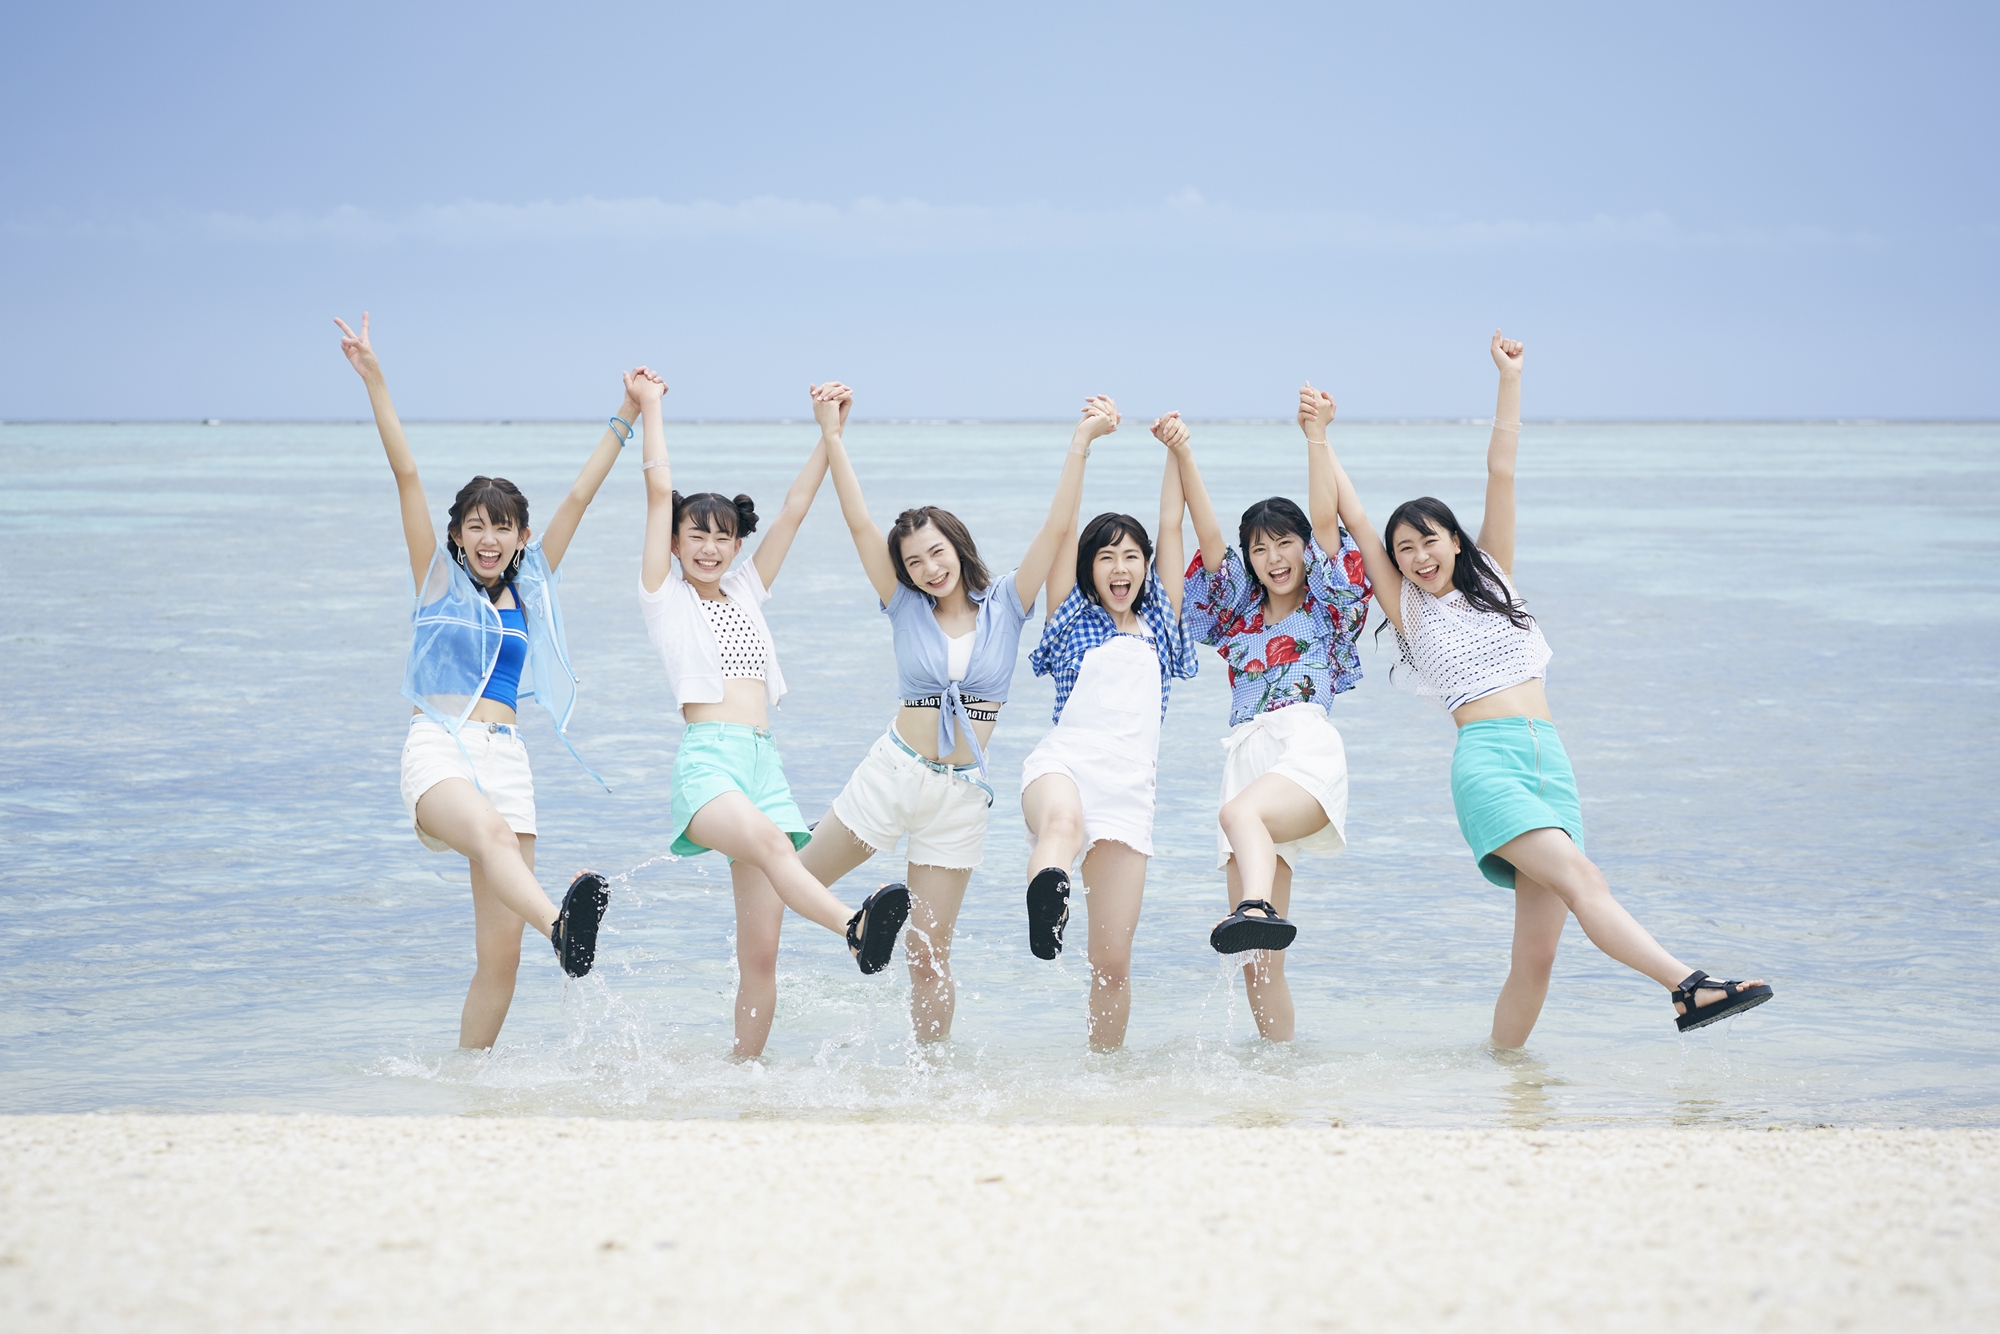 Crown Pop 8 19 月 Crown Pop Summer Time Rule Photo Book 発売記念サイン会開催 クラポかわいい クラポの夏 Music Note Official Blog